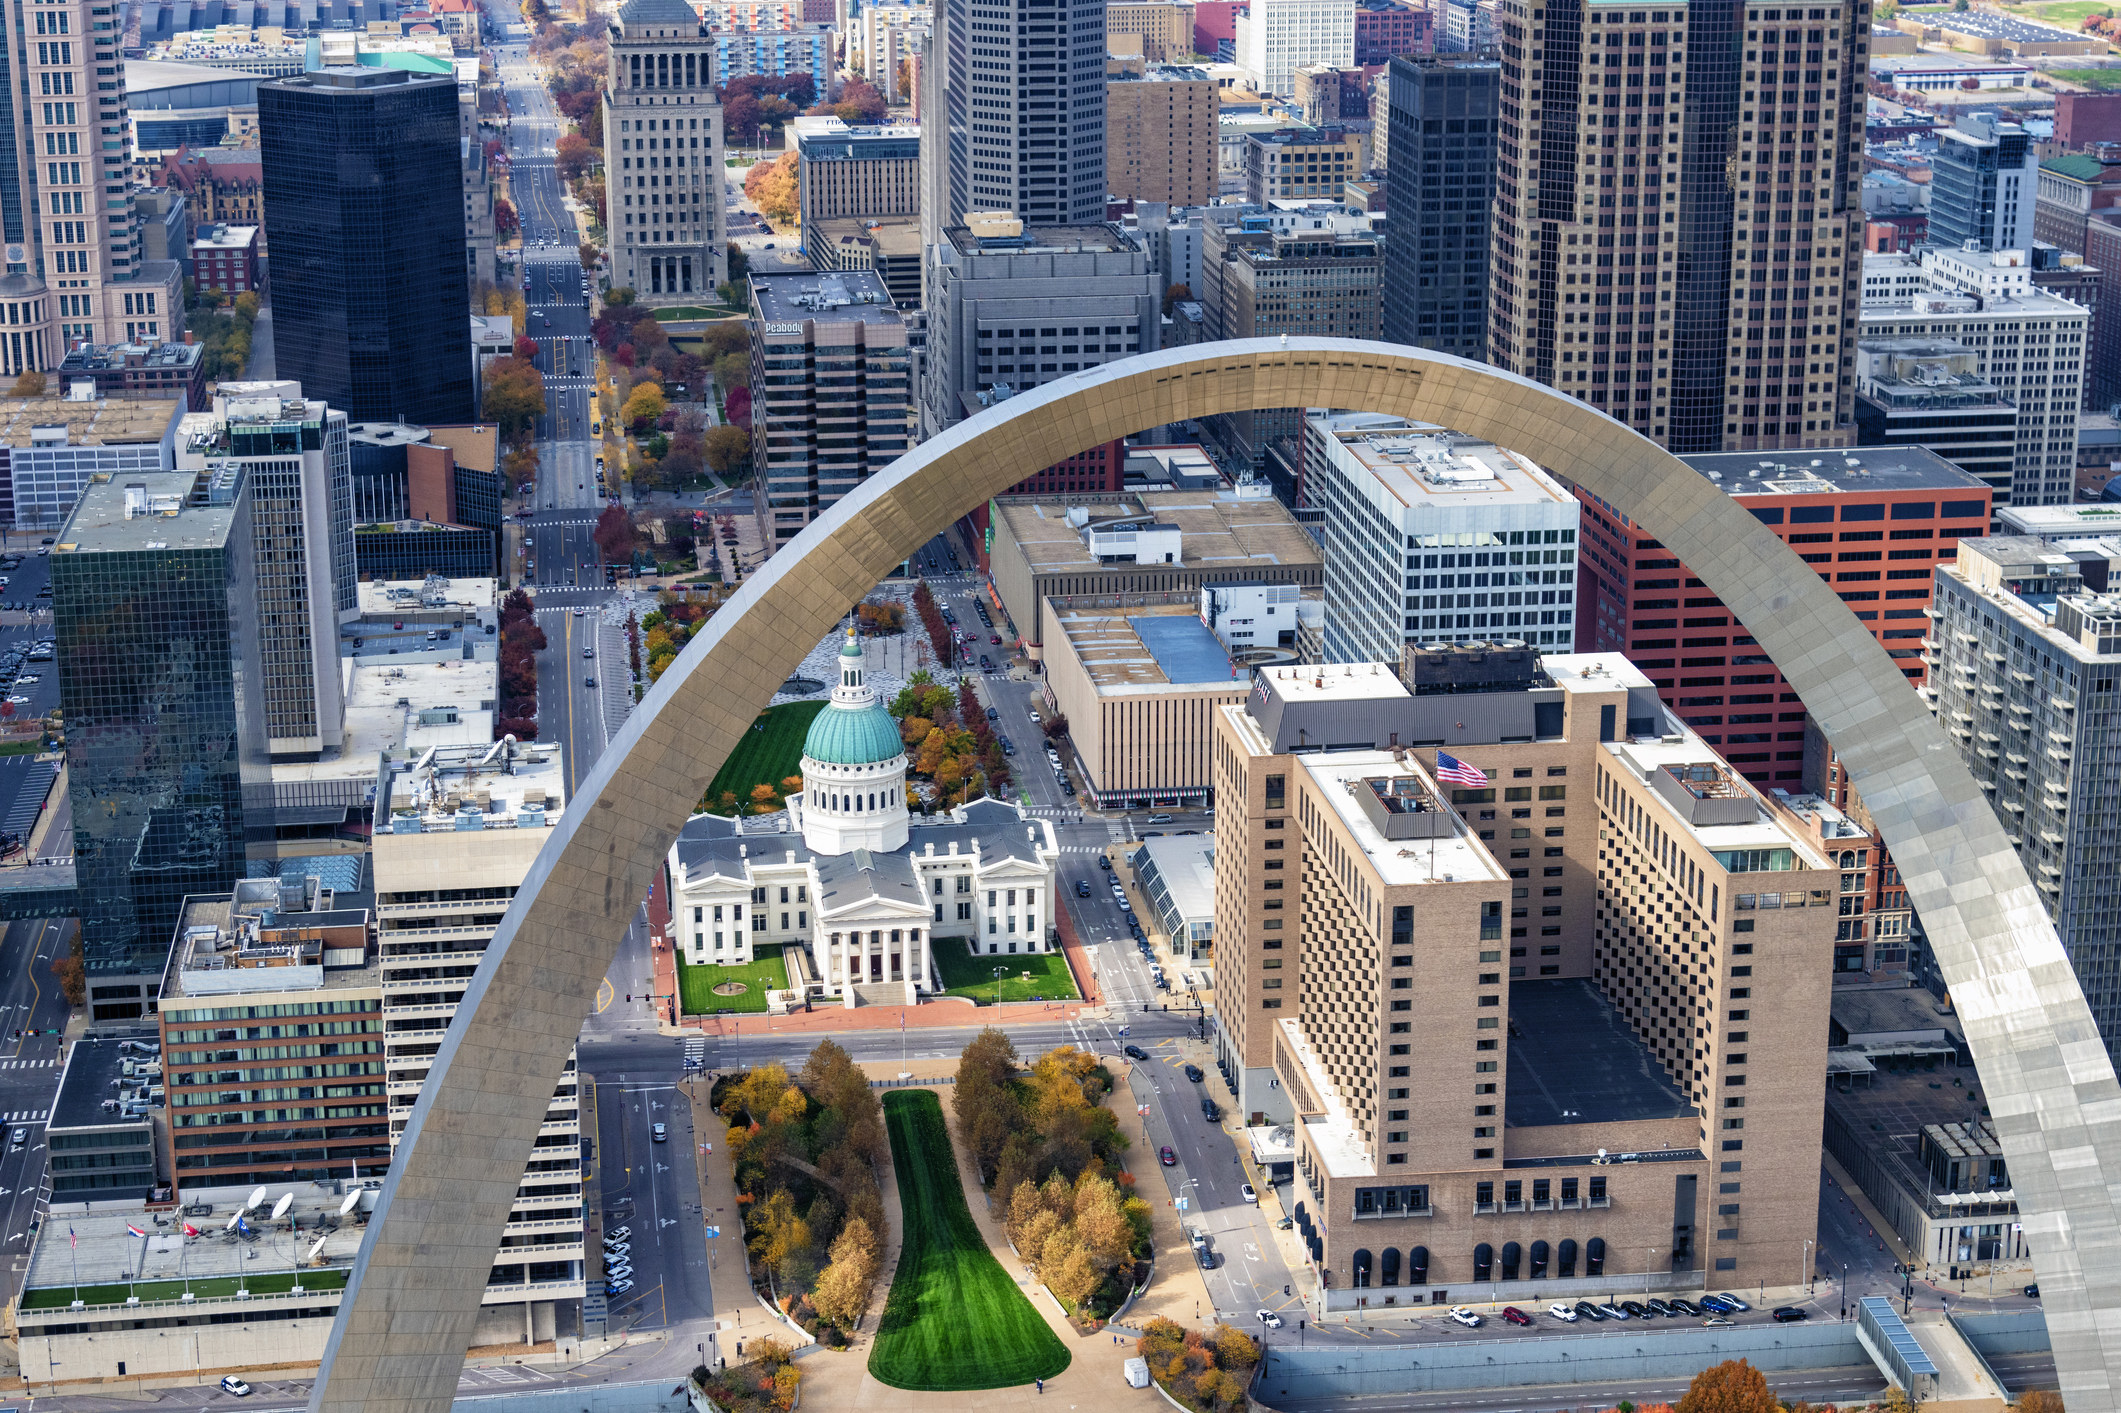 The Gateway to the West Arch and the downtown area of St. Louis.